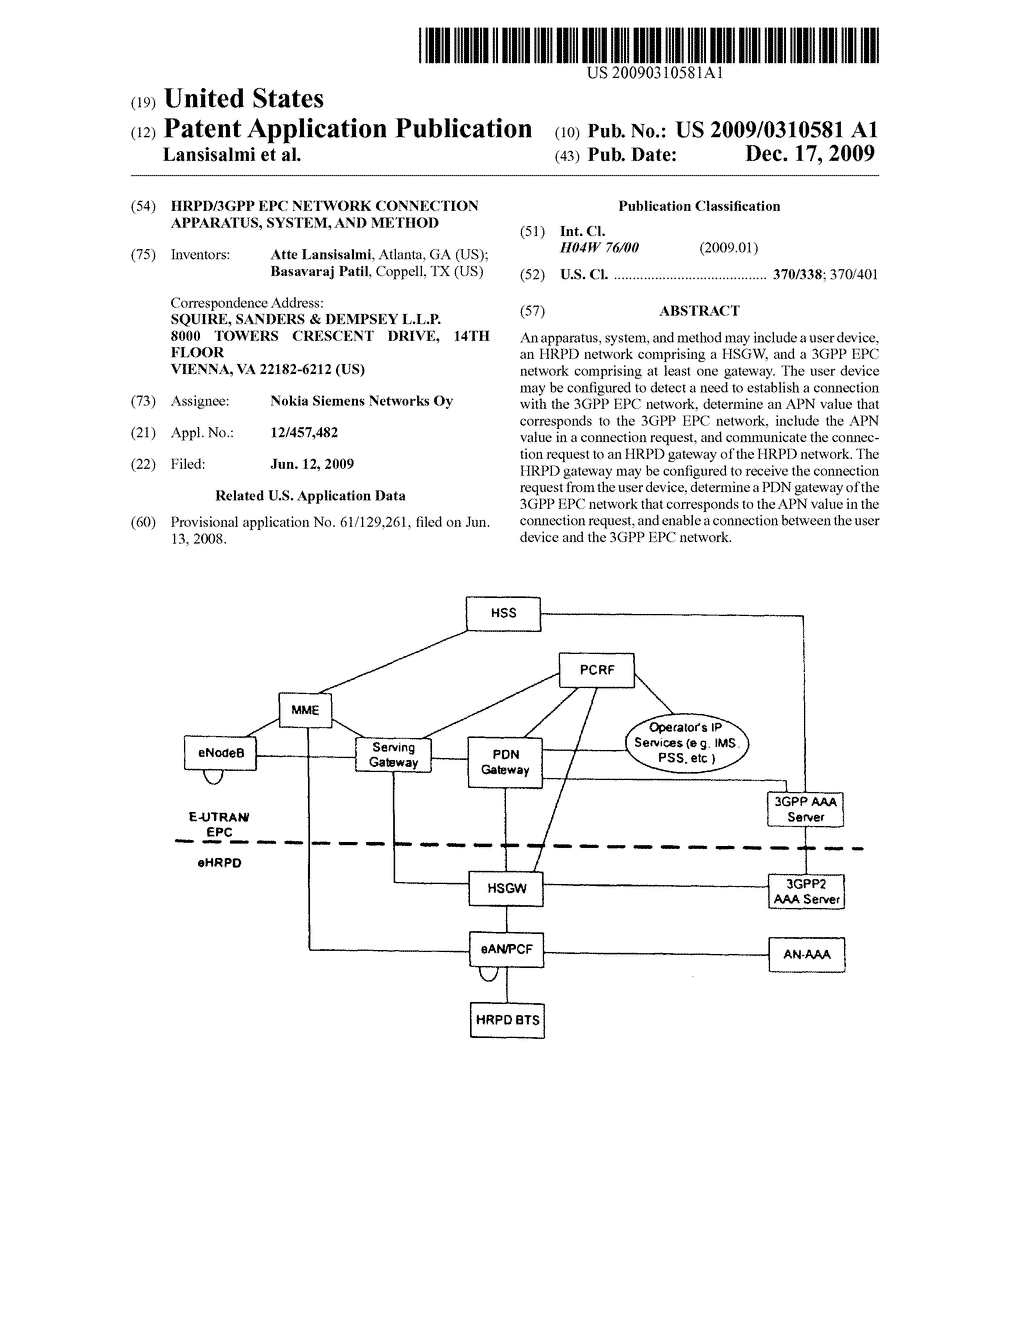 HRPD/3GPP EPC network connection apparatus, system, and method - diagram, schematic, and image 01